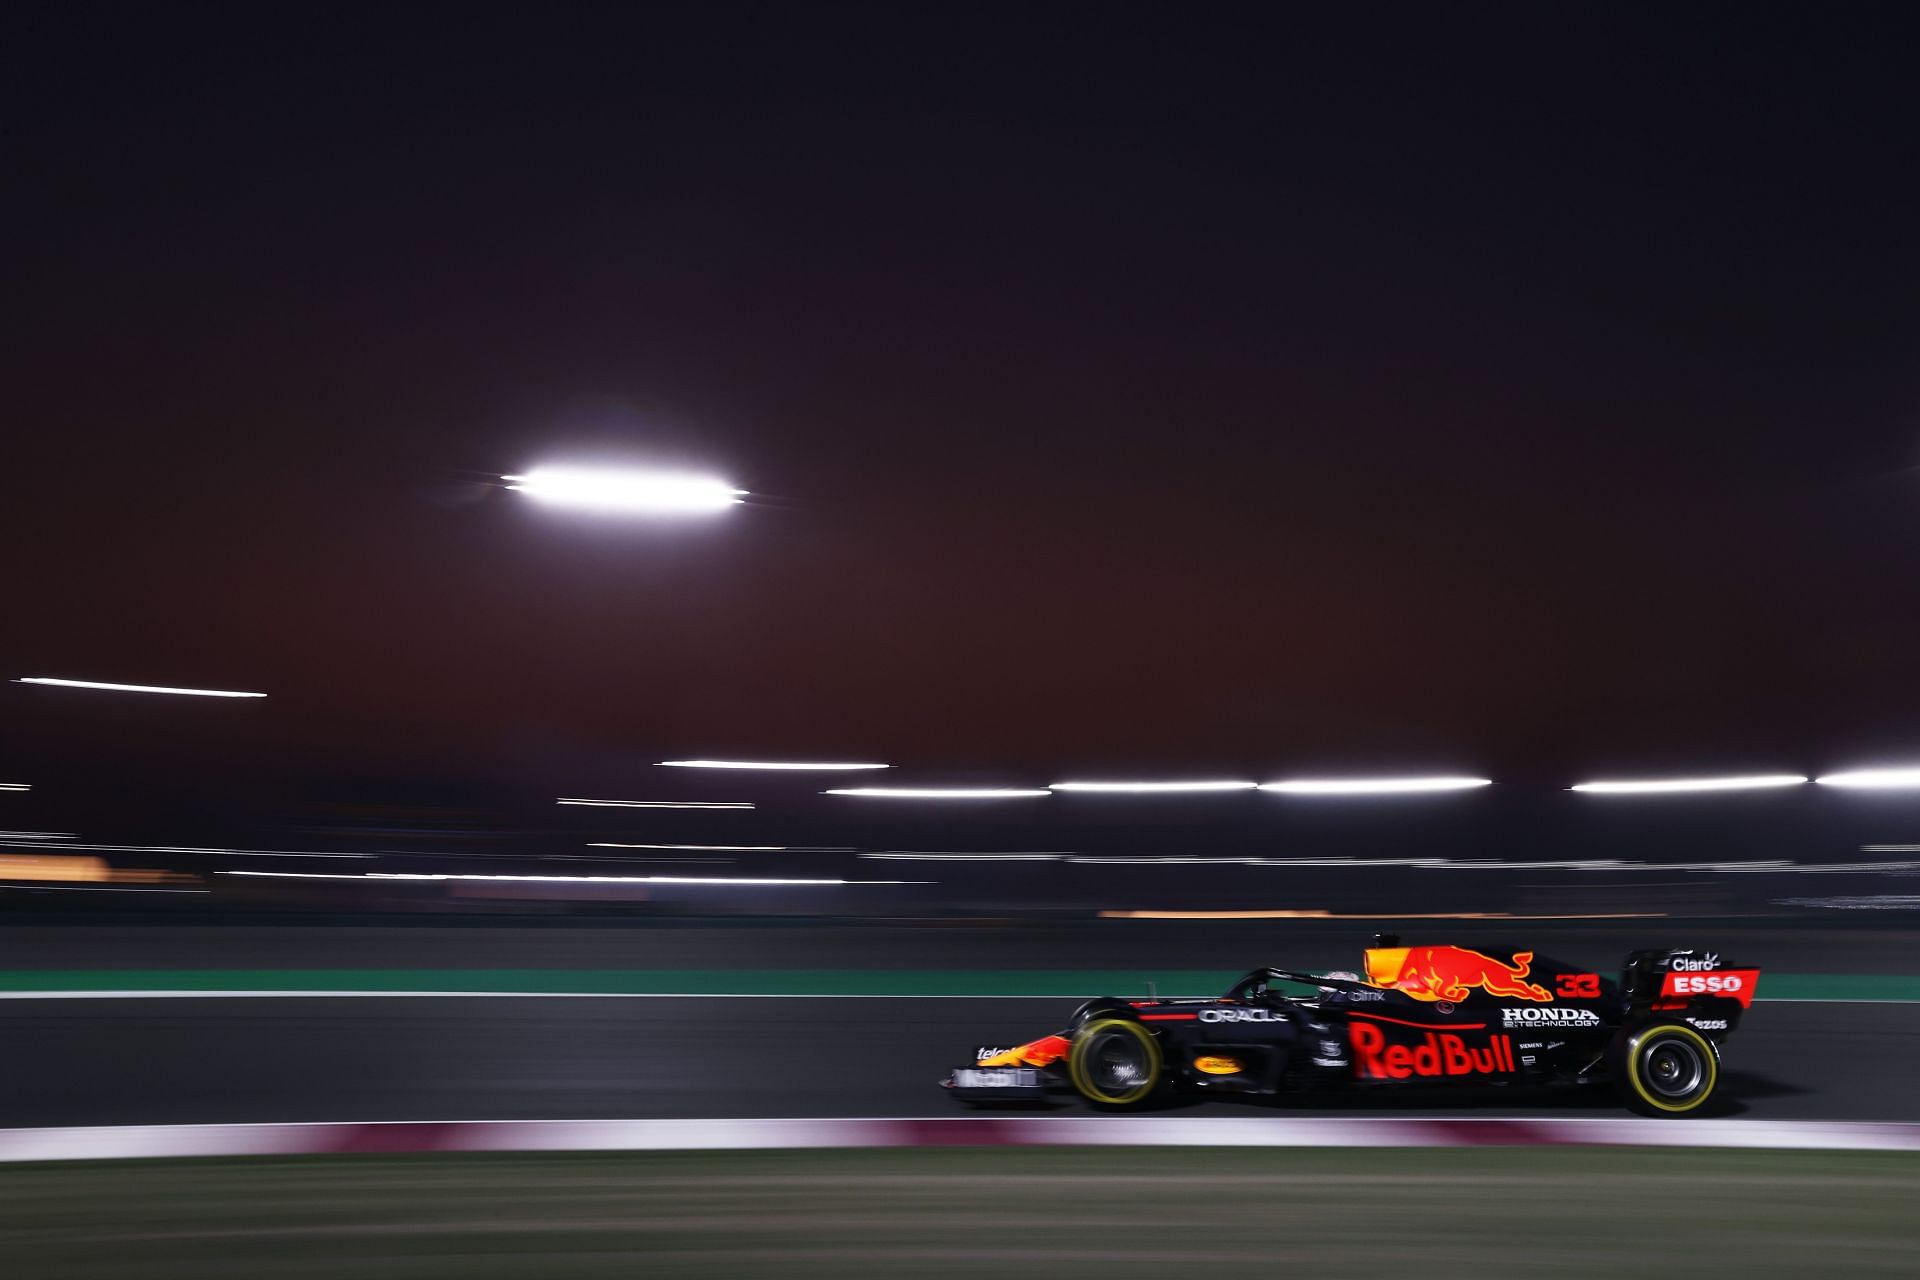 F1 Grand Prix of Qatar - Practice 2 (Photo courtesy Getty Images)